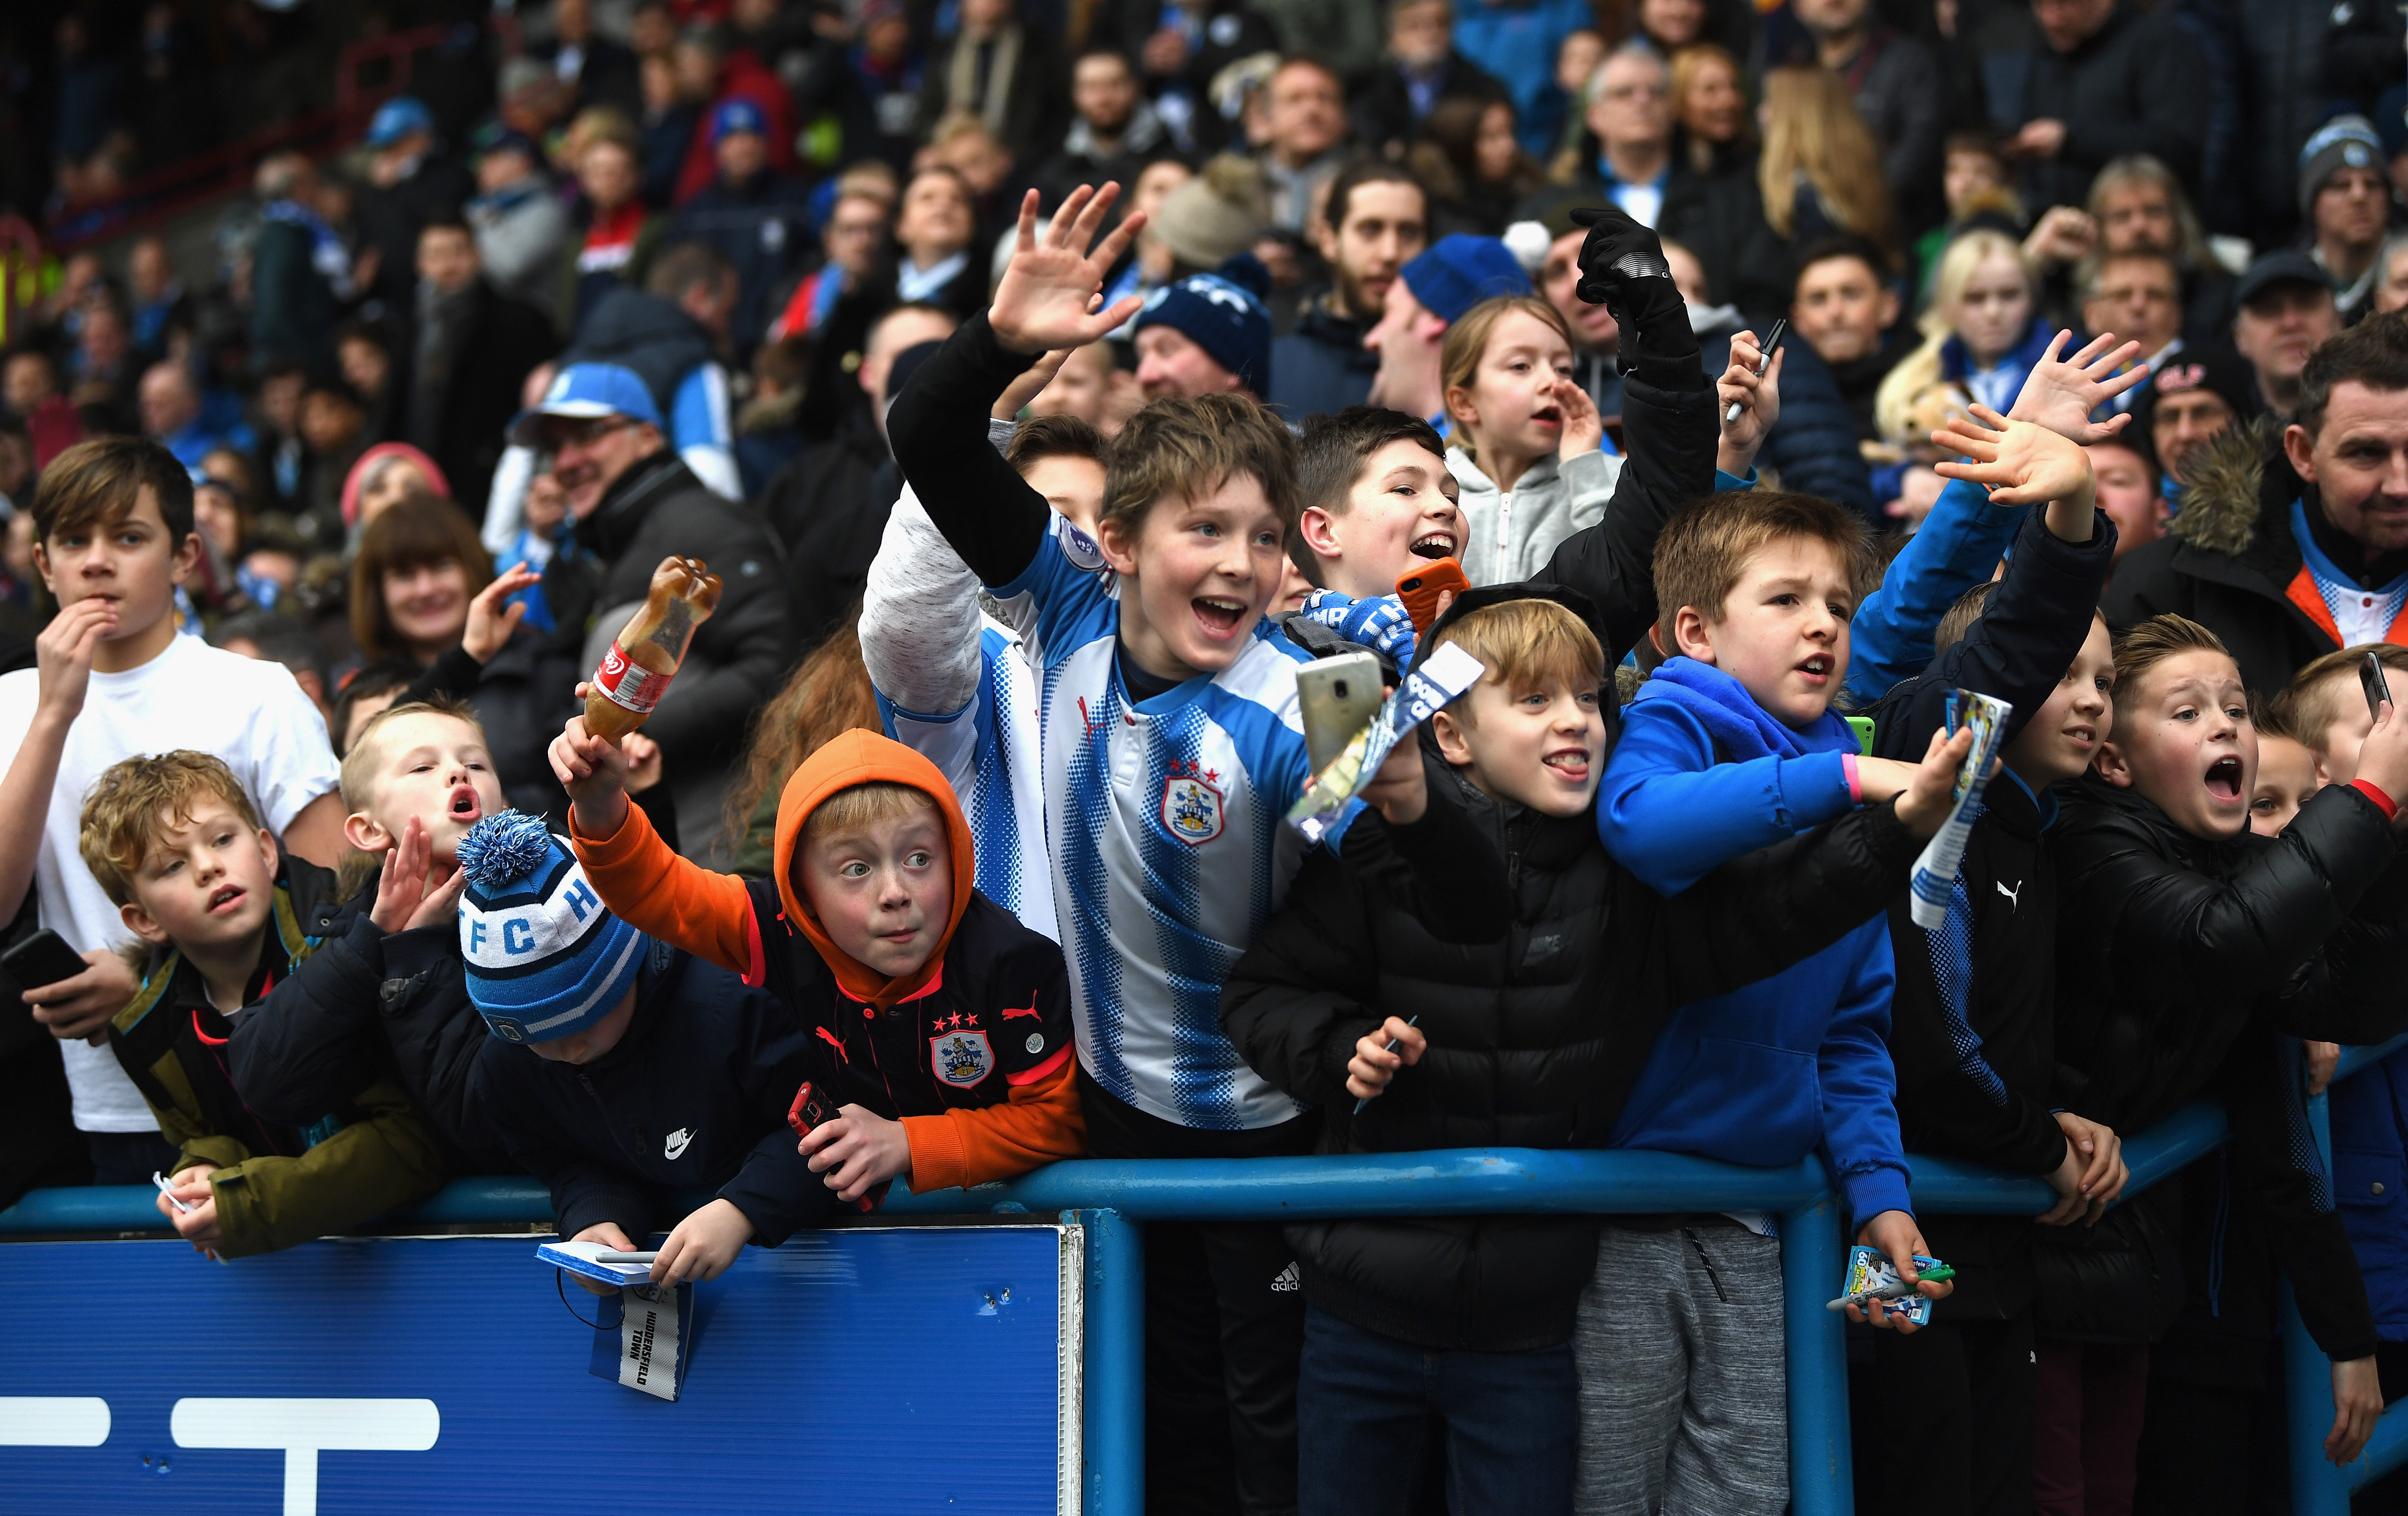 HUDDERSFIELD, ENGLAND - JANUARY 27:  Young fans enjoy the pre match atmosphere prior to The Emirates FA Cup Fourth Round match between Huddersfield Town and Birmingham City at John Smith's Stadium on January 27, 2018 in Huddersfield, England.  (Photo by Gareth Copley/Getty Images)